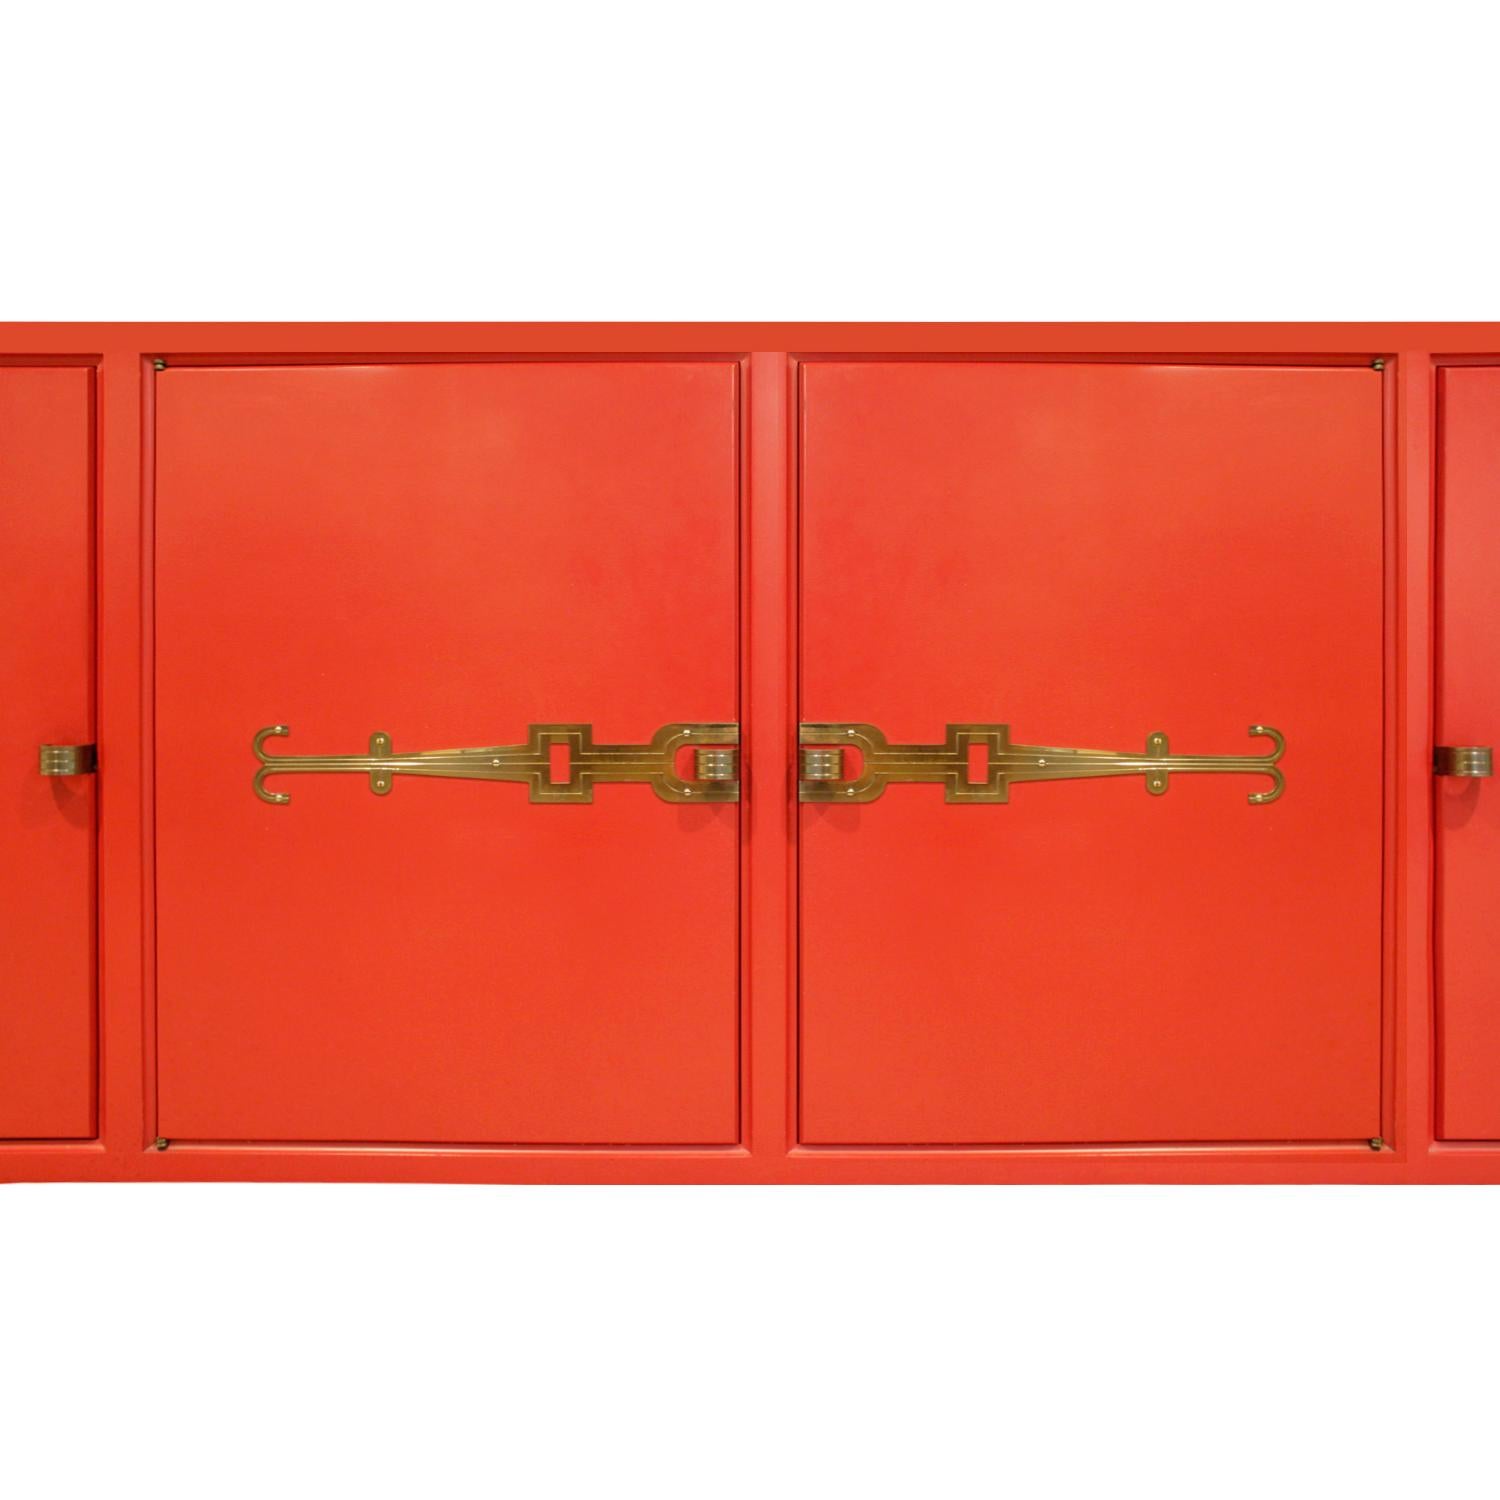 Mid-Century Modern Tommi Parzinger 4 Door Chinese Red Cabinet With Iconic Hardware 1950s